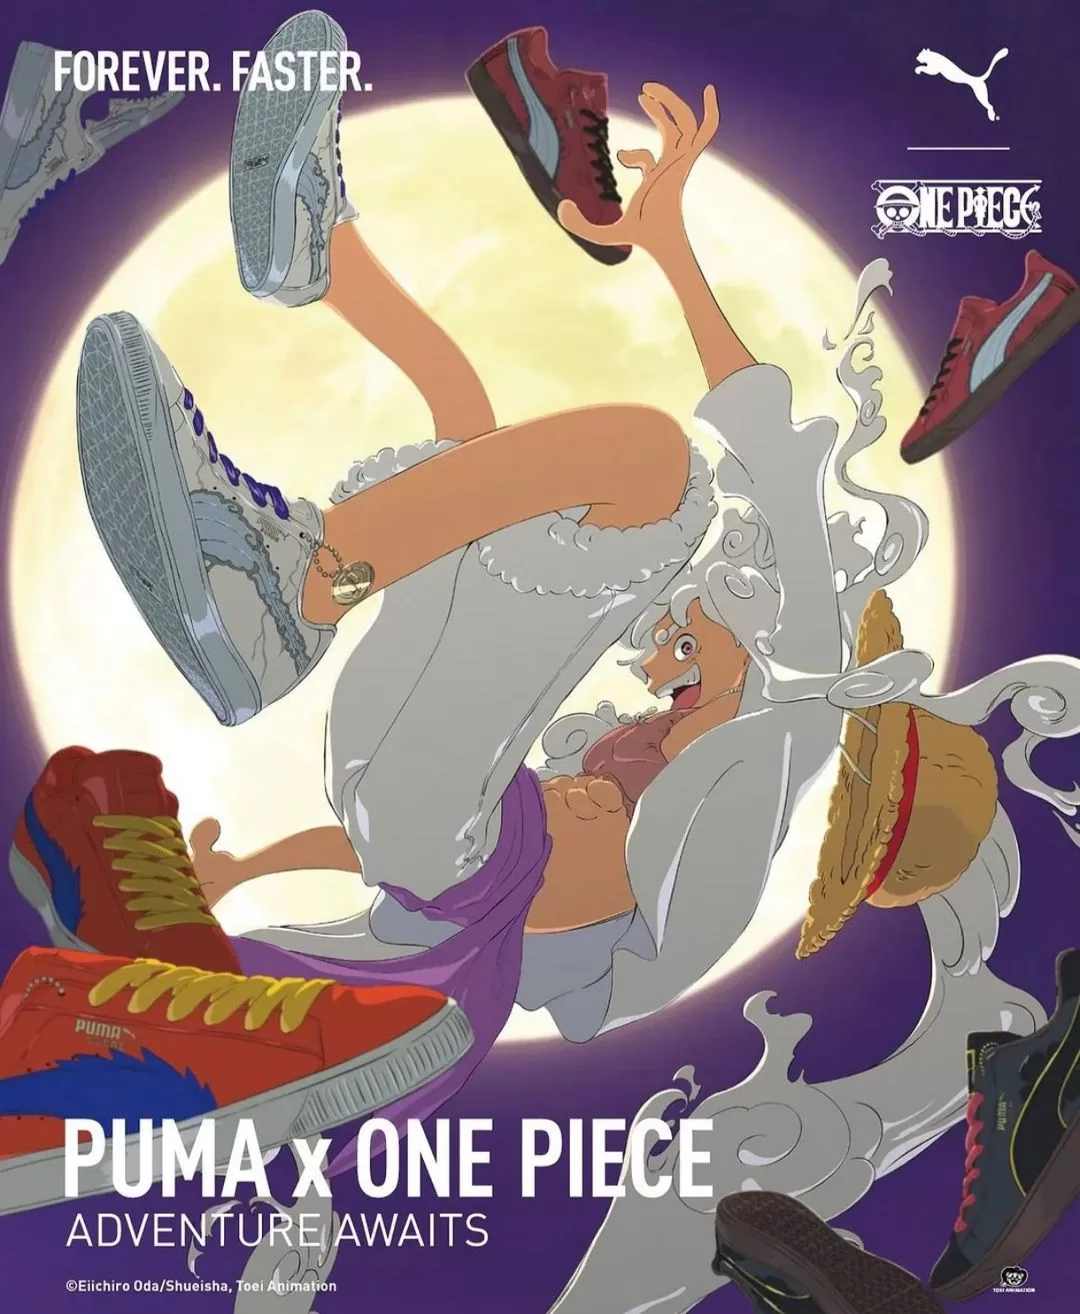 Calling all Nakama! Set your sights on the ultimate collab – One Piece x Puma sets sail next week with a limited-edition collection of PUMA Suede sneakers! Four Legendary Captains, Four Signature Styles Dropping on March 23rd, this collection boasts four unique PUMA Suede designs, each inspired by a beloved One Piece captain: